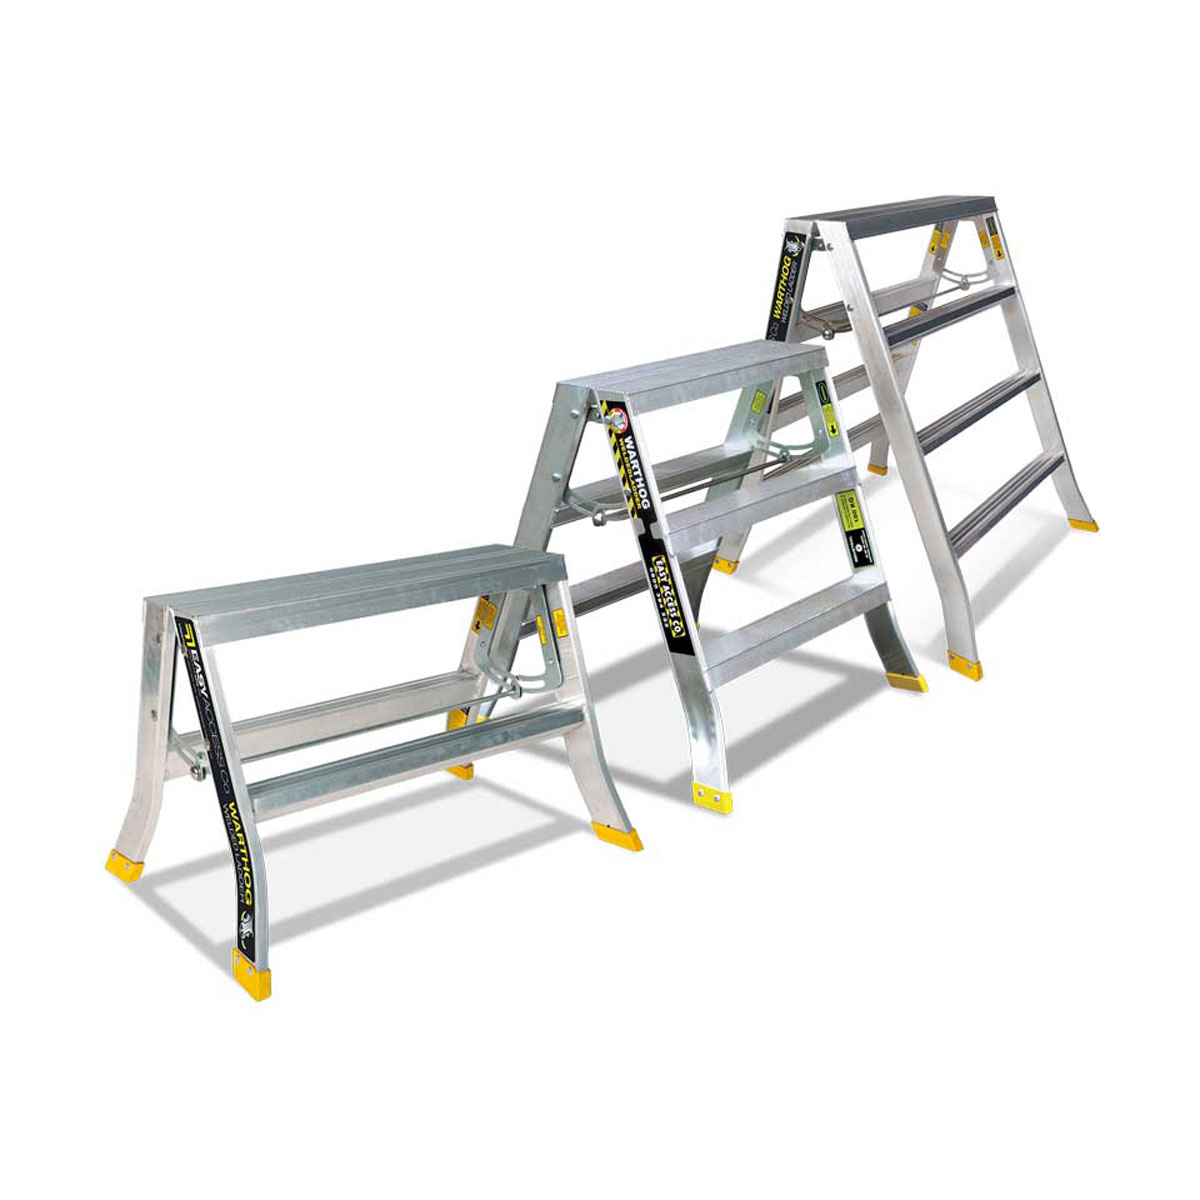 Buy Step Ladders - Heavy-Duty Wide  in Step Ladders from Warthog available at Astrolift NZ